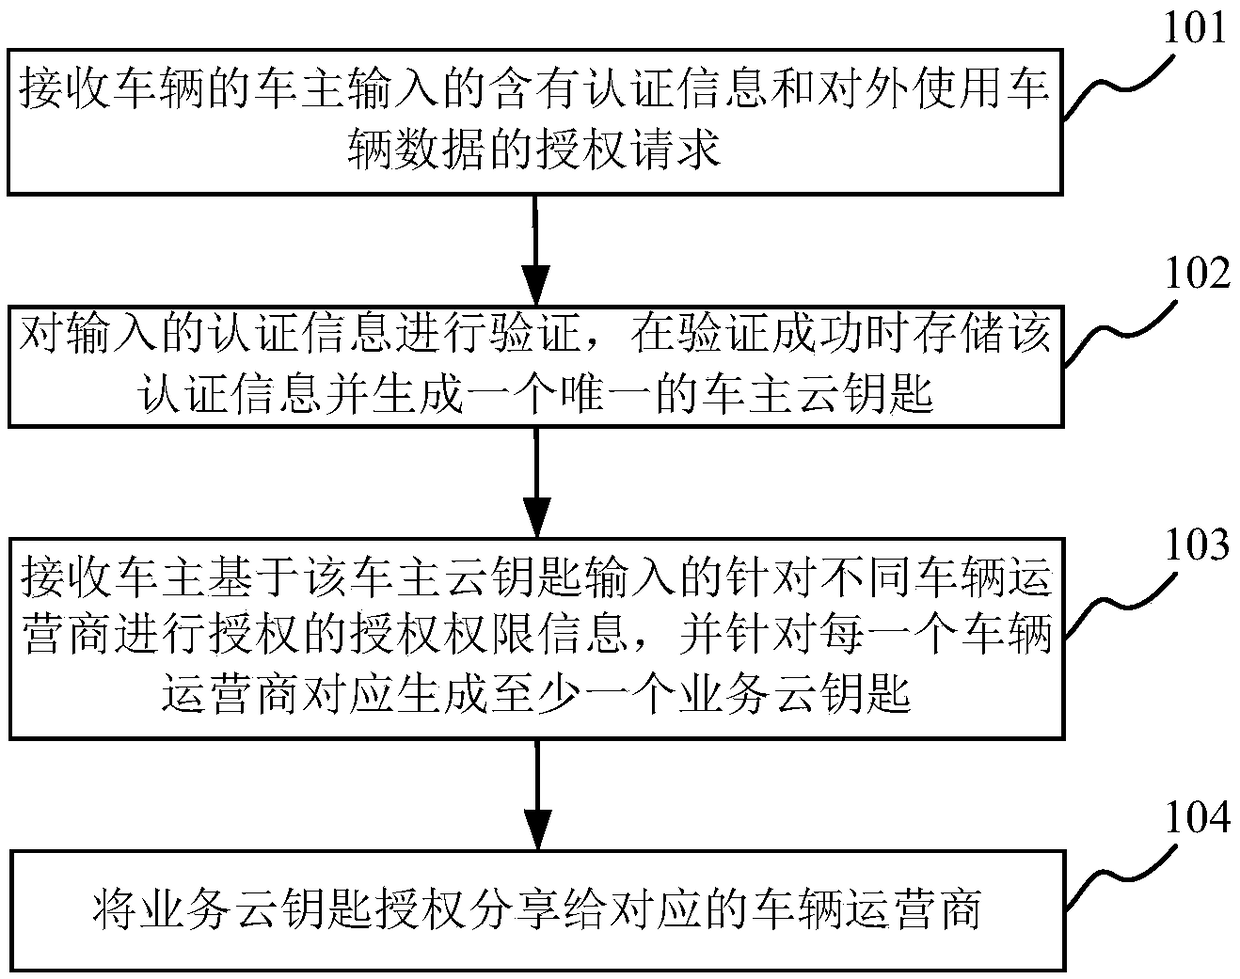 Method and system for generating and authorizing virtual cloud key